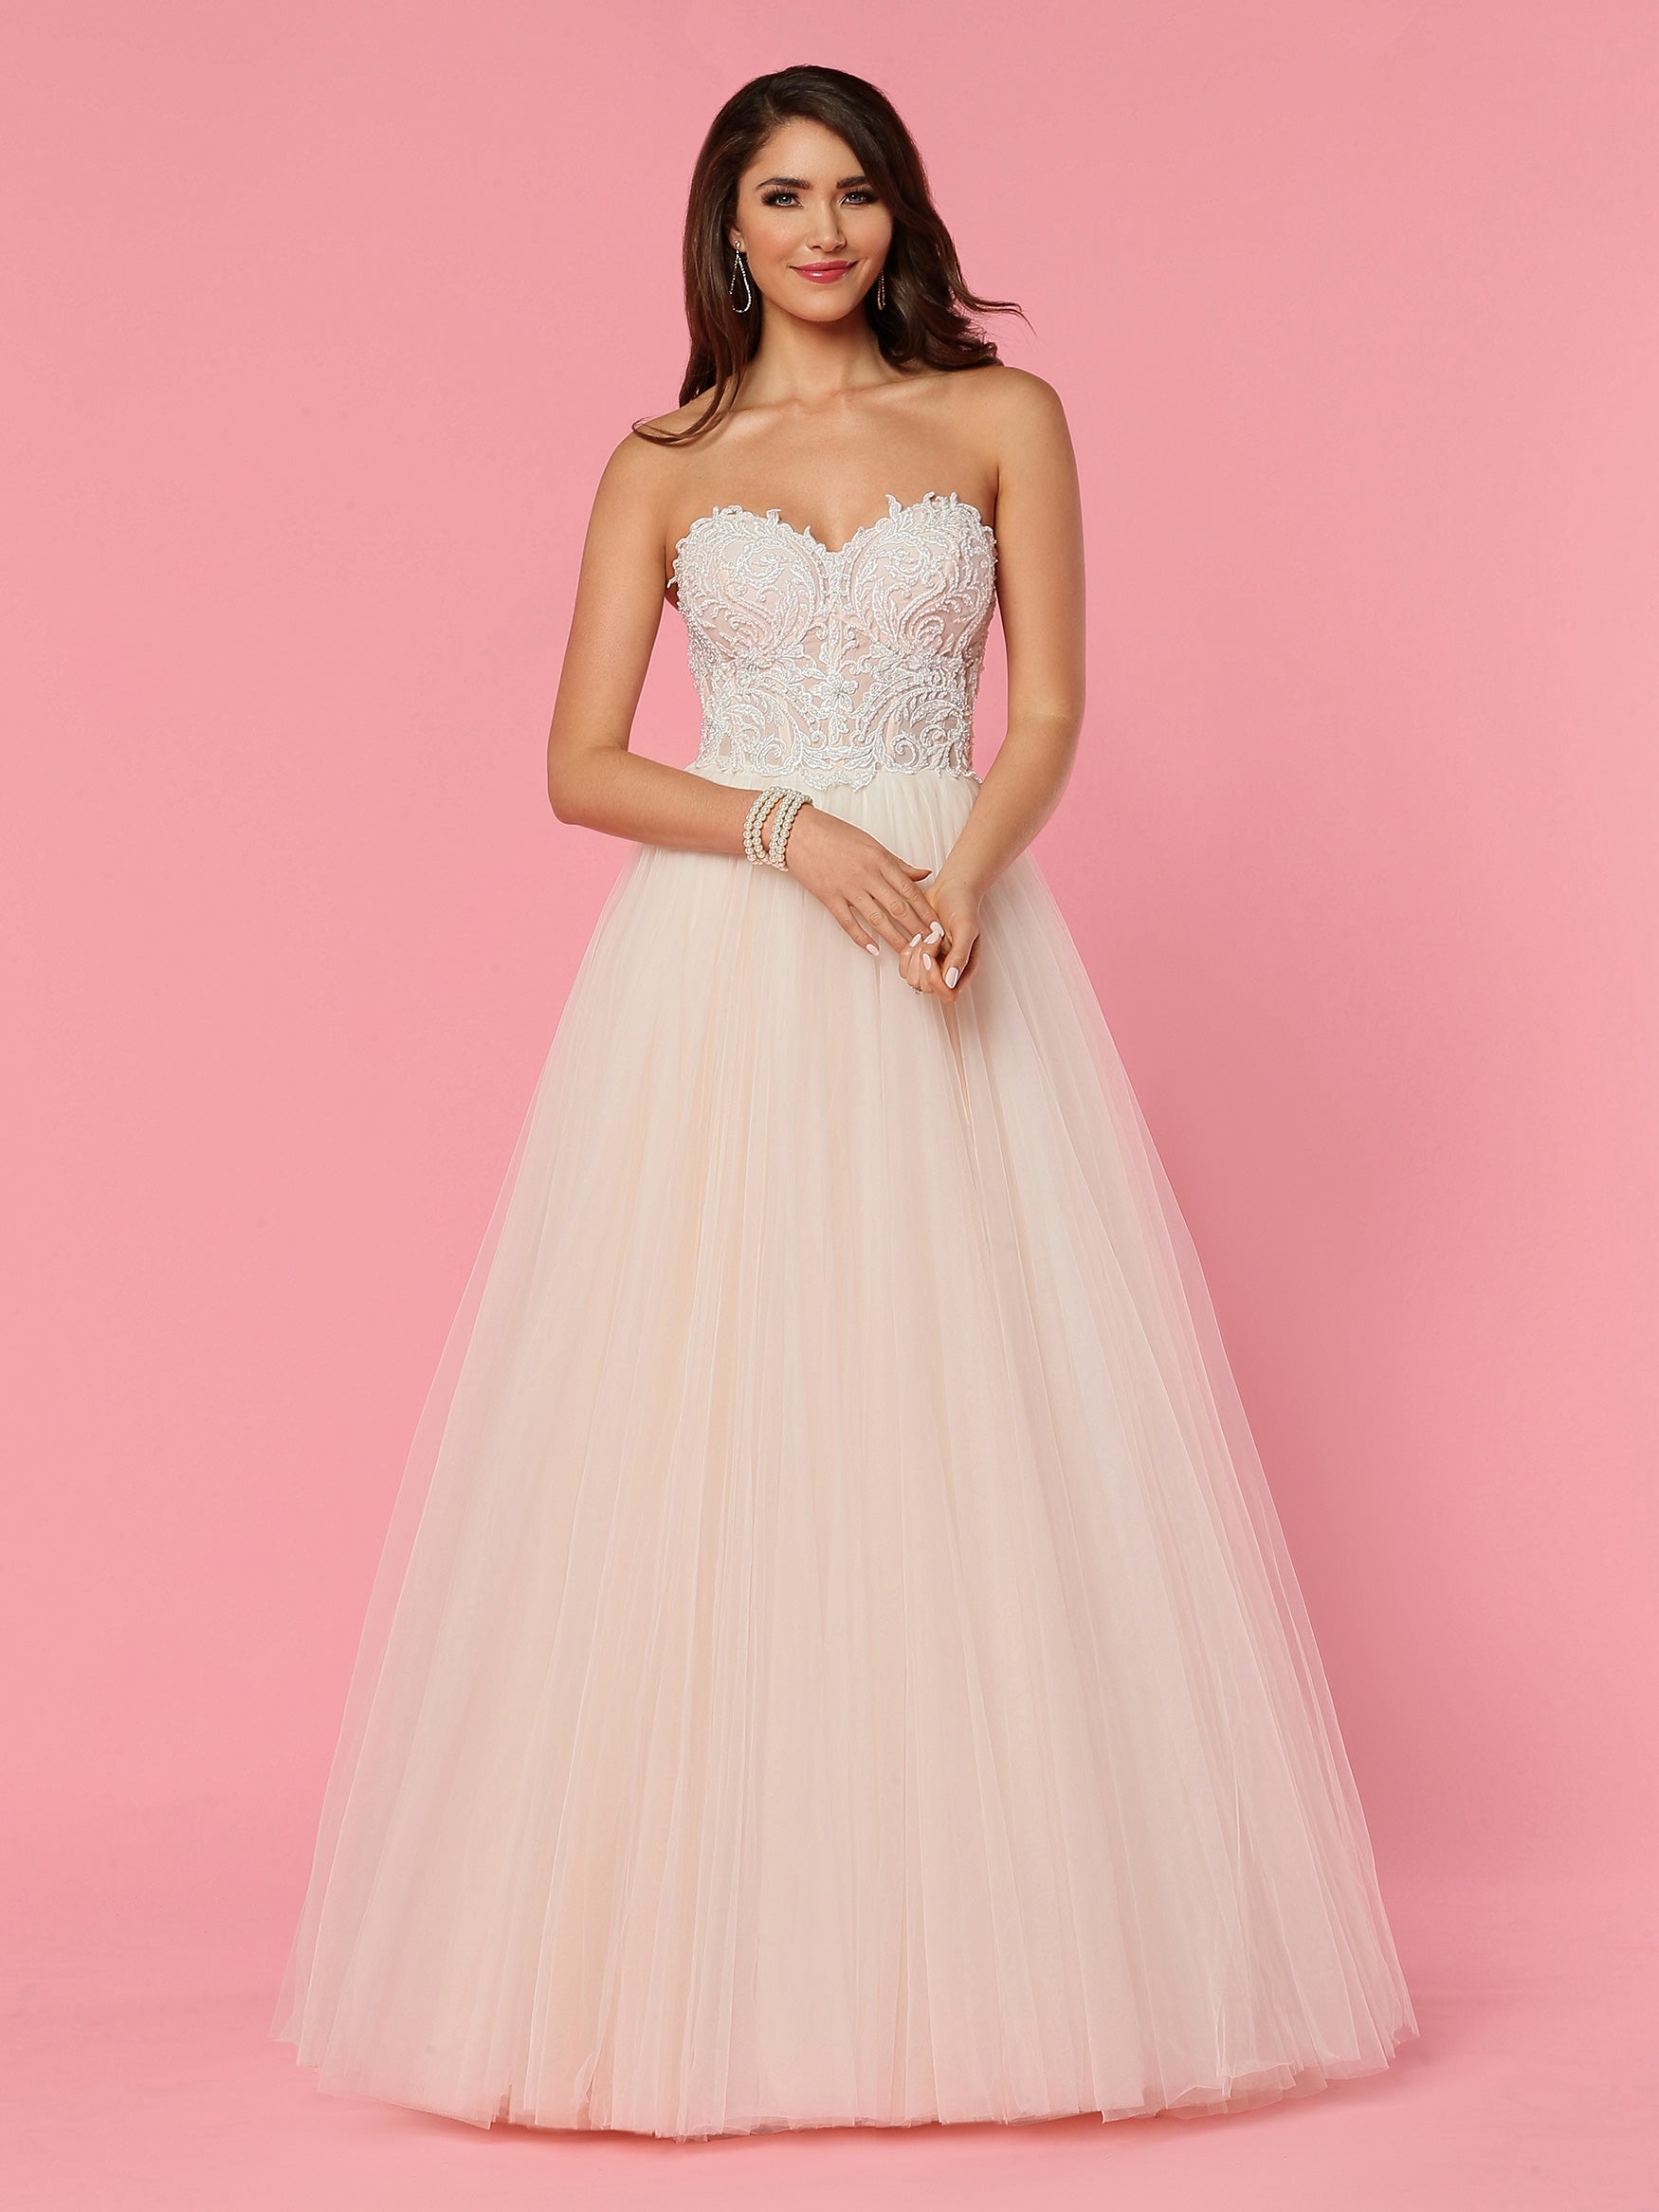 Davinci Bridal 50450 is a Lace & Tulle Ballgown Wedding Dress. Featuring a Strapless Sweetheart Corset style Embellished Lace Bodice with a Lush Full Tulle skirt.   Available for 1-2 Week Delivery!!!  Available Sizes: 2,4,6,8,10,12,14,16,18,20  Available Colors: Ivory/Blush, Ivory/Ivory